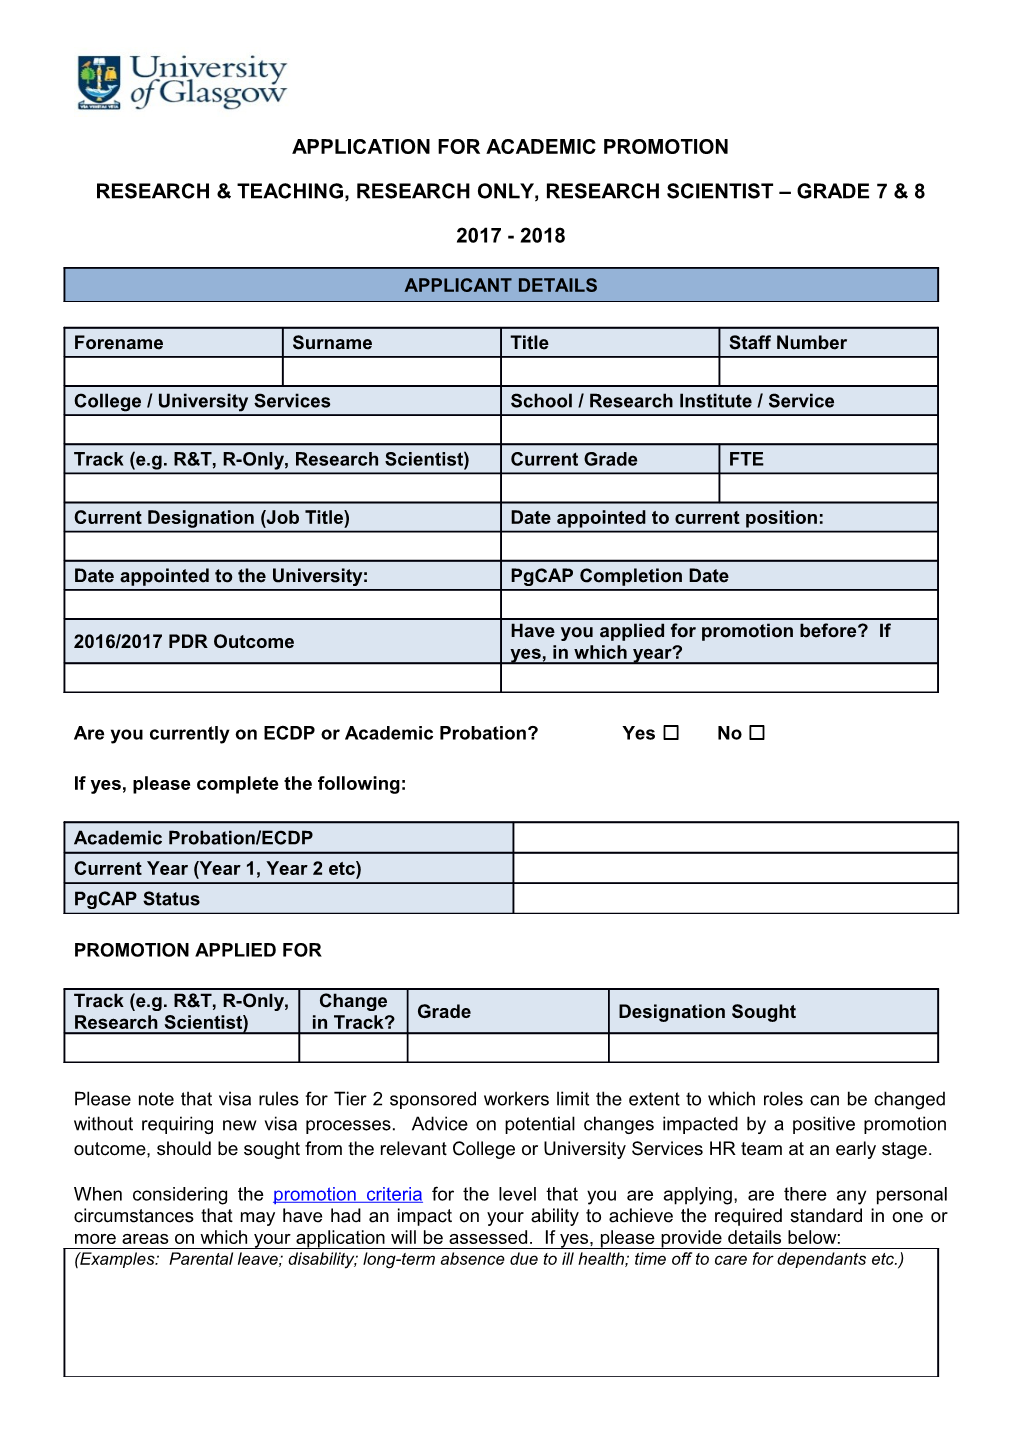 Application for Academic Promotion